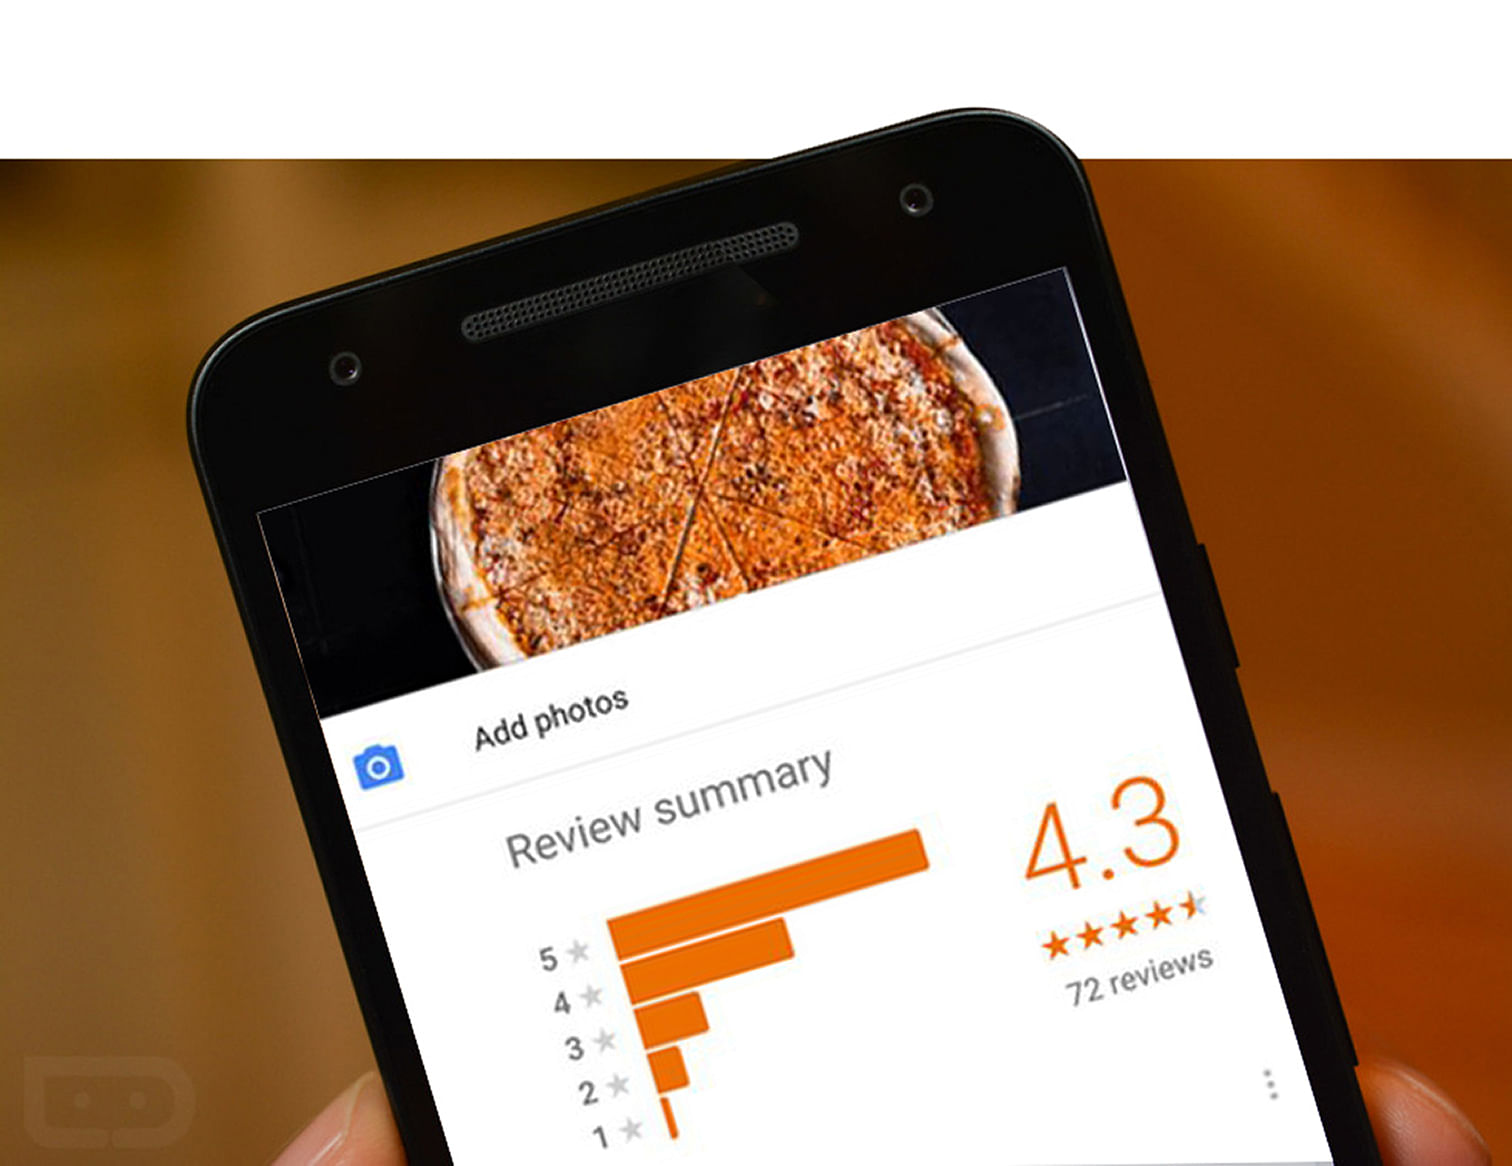 Google asks you to review a restaurant even when you are in the vicinity. 